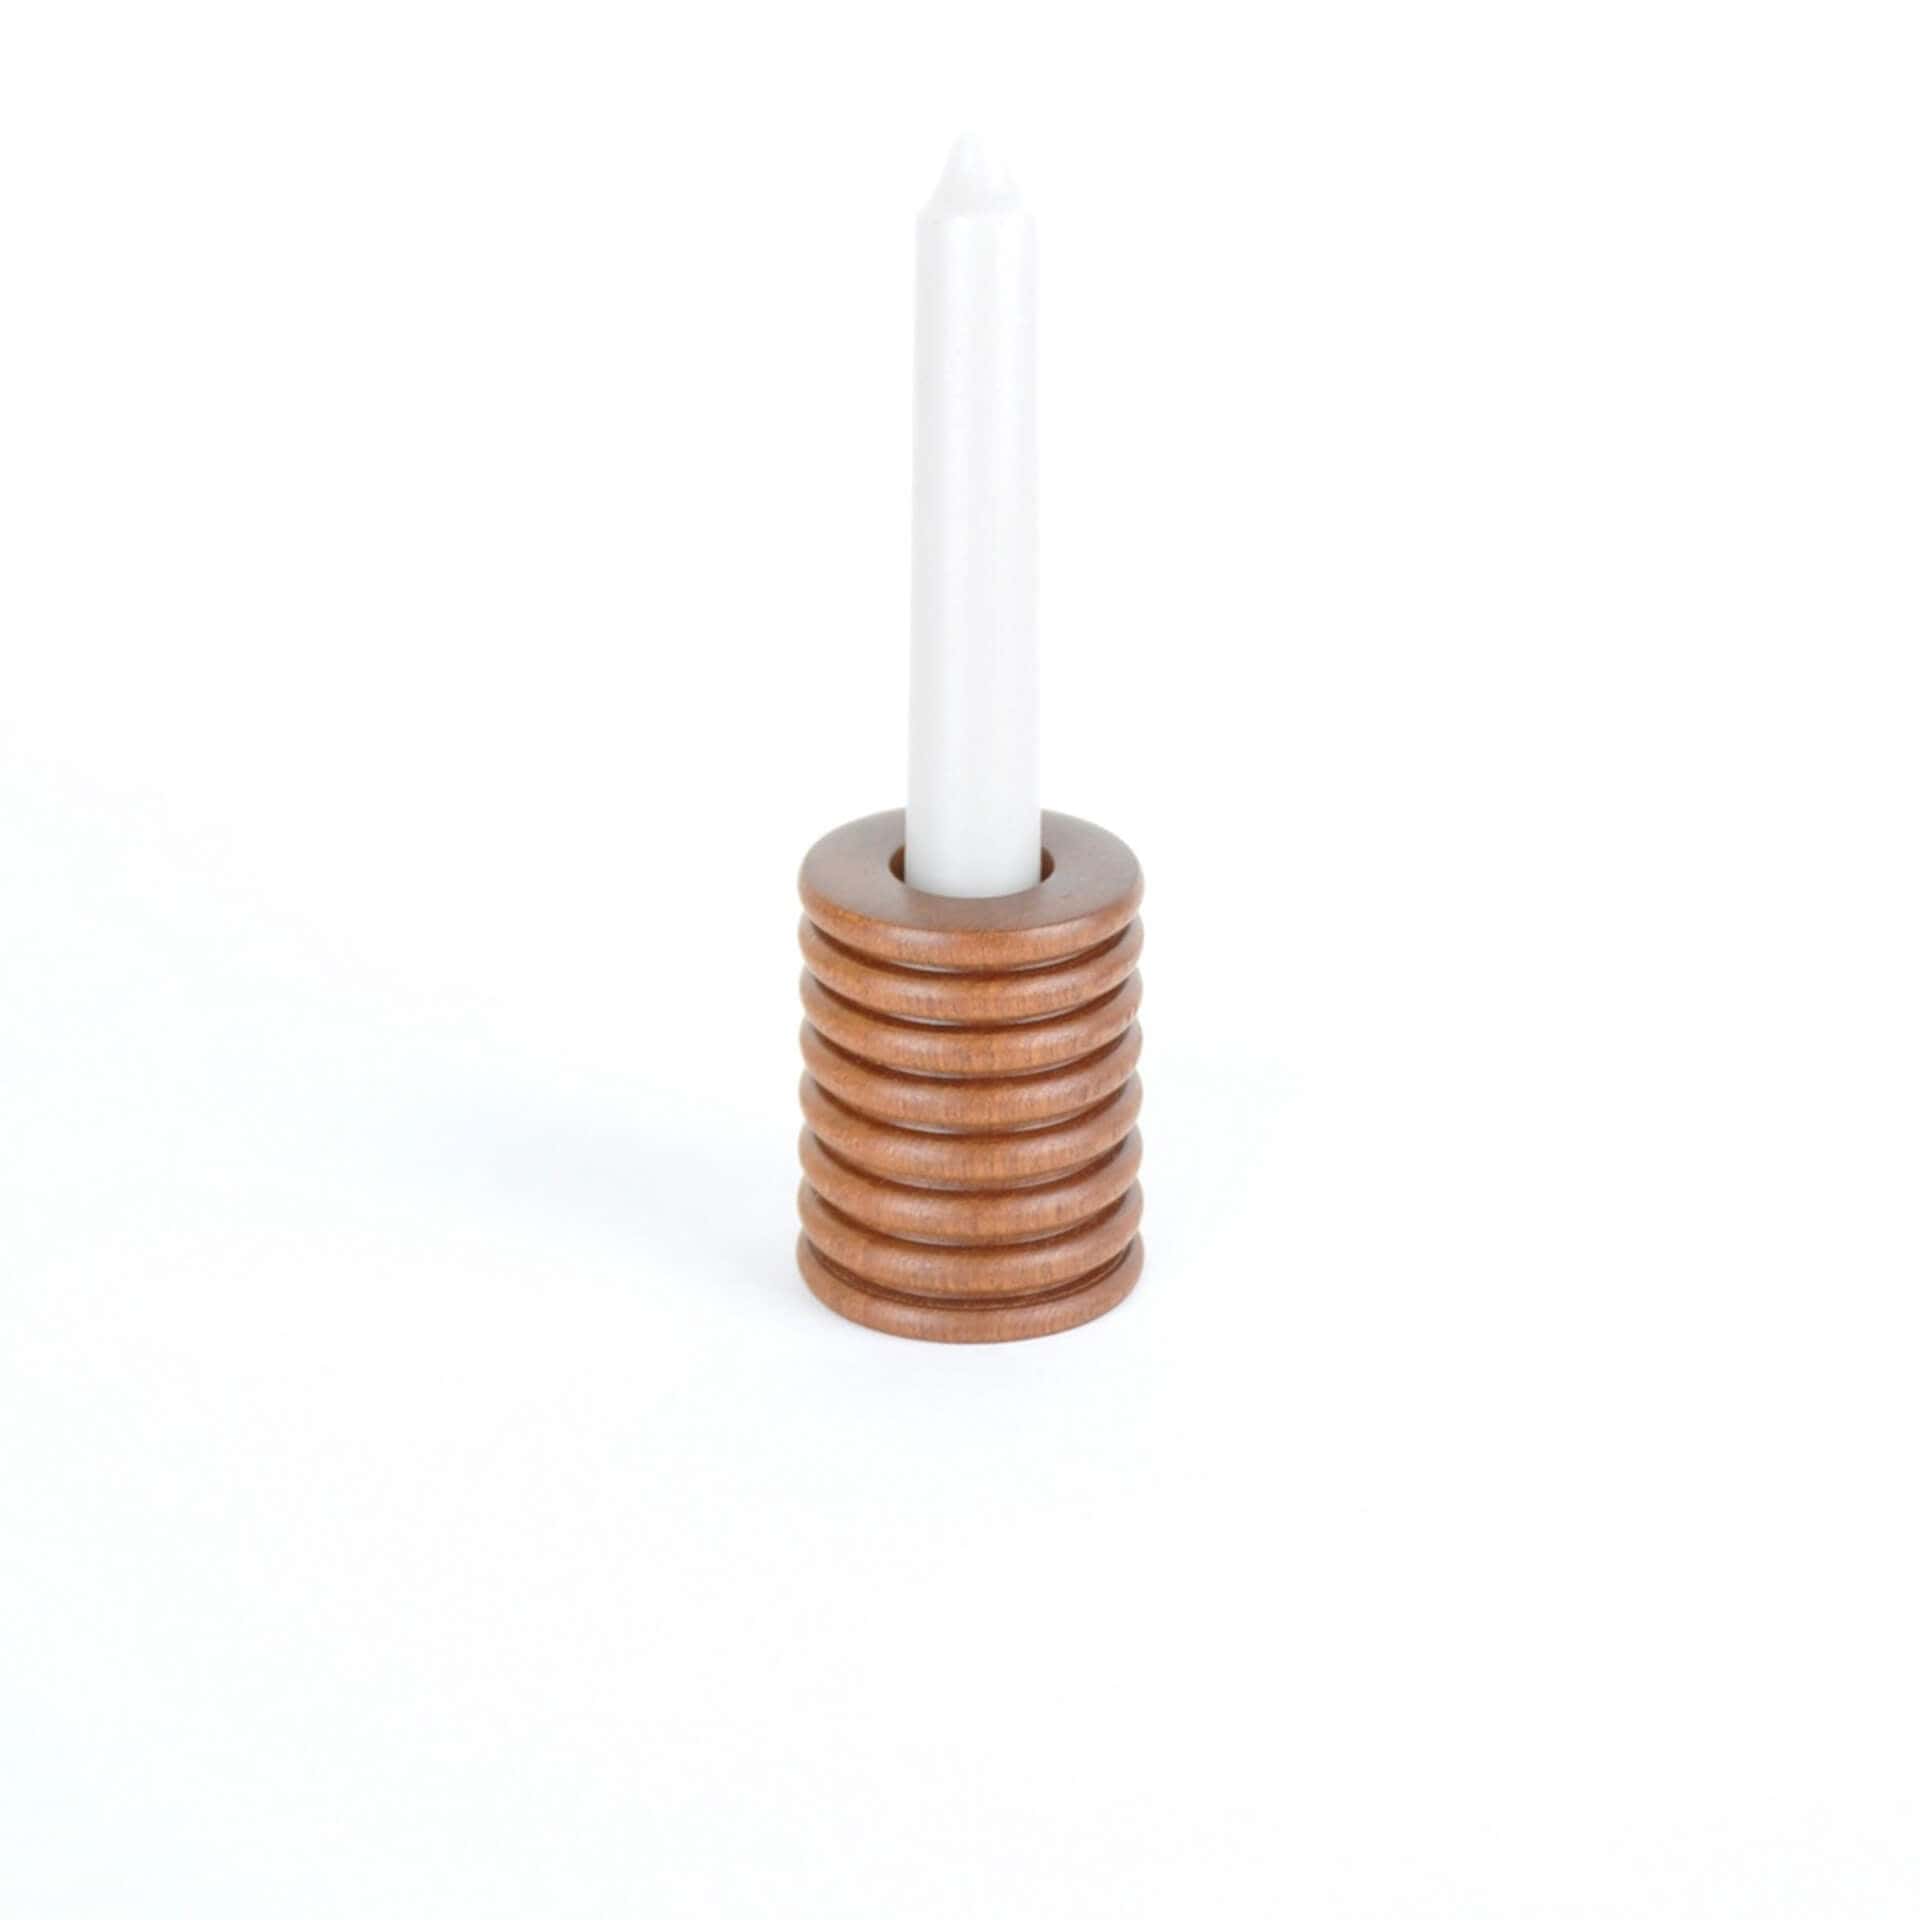 Something From The Turnery Candle Holder Short a Wooden Candle Holders - Sapele